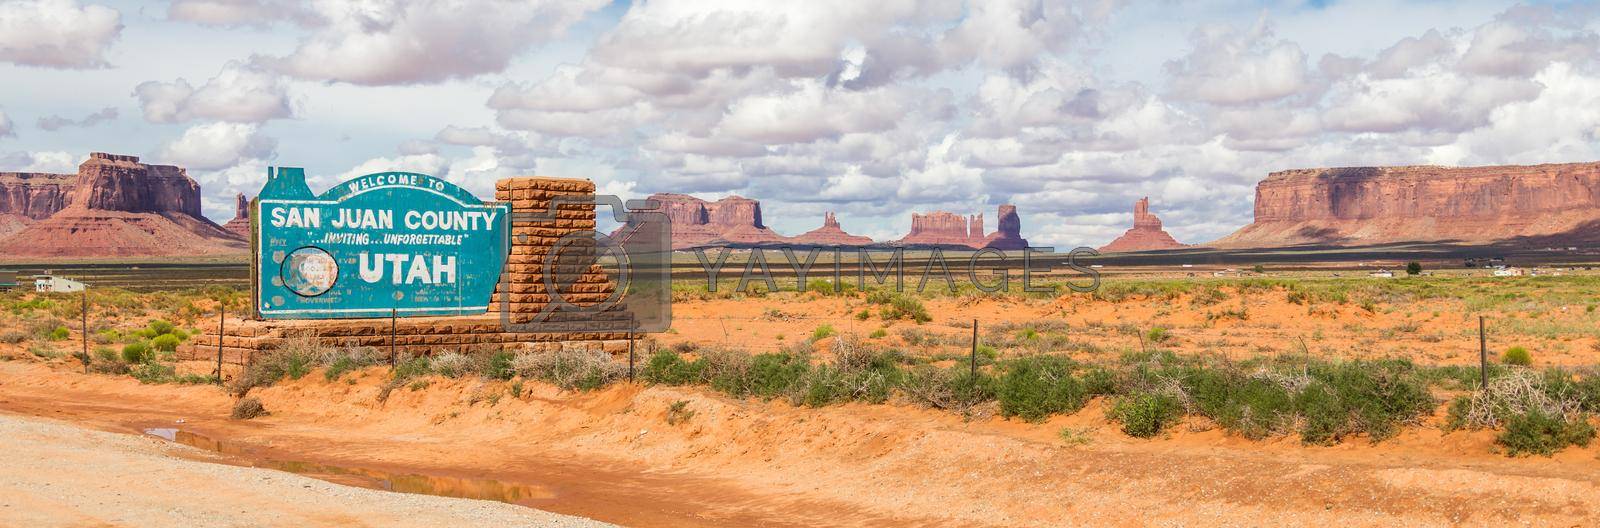 Royalty free image of Welcome sign in desert for San Juan County in Monument Valley in Utah. by Mariakray